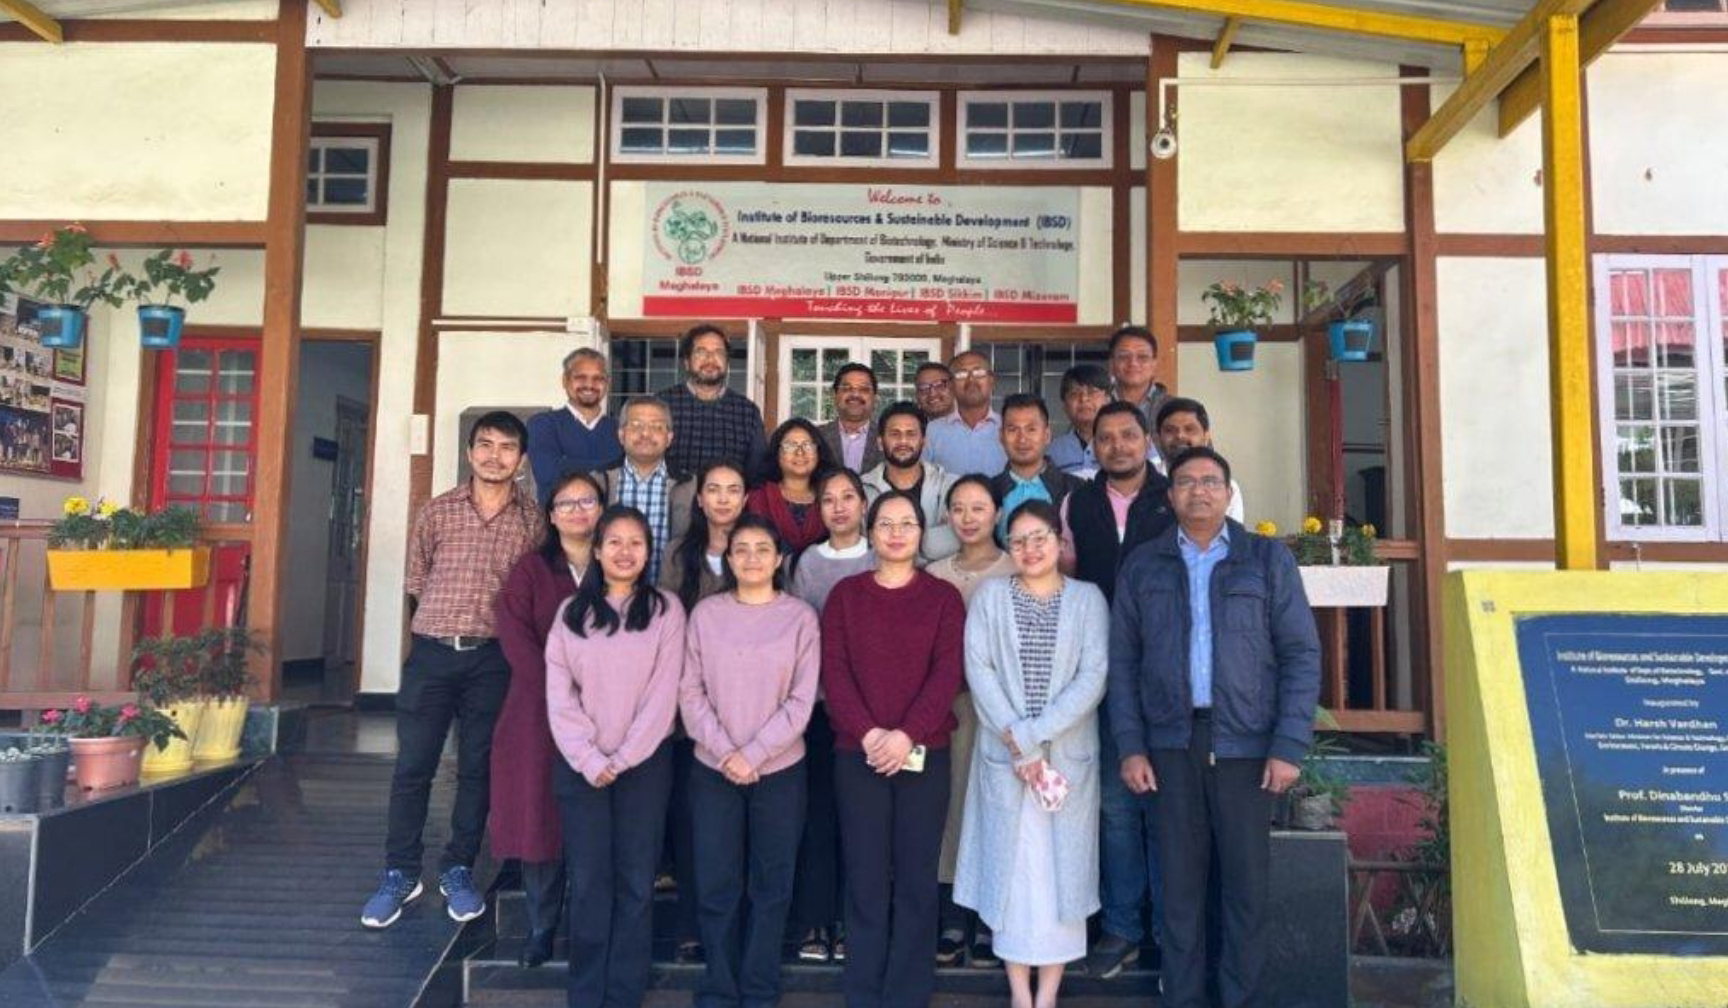 IBSD and NII, New Delhi organised Research Collaborative Meeting at Shillong  with team of Scientists from IBSD & NII for Translational Research on  Medicinal Plants of Northeast region